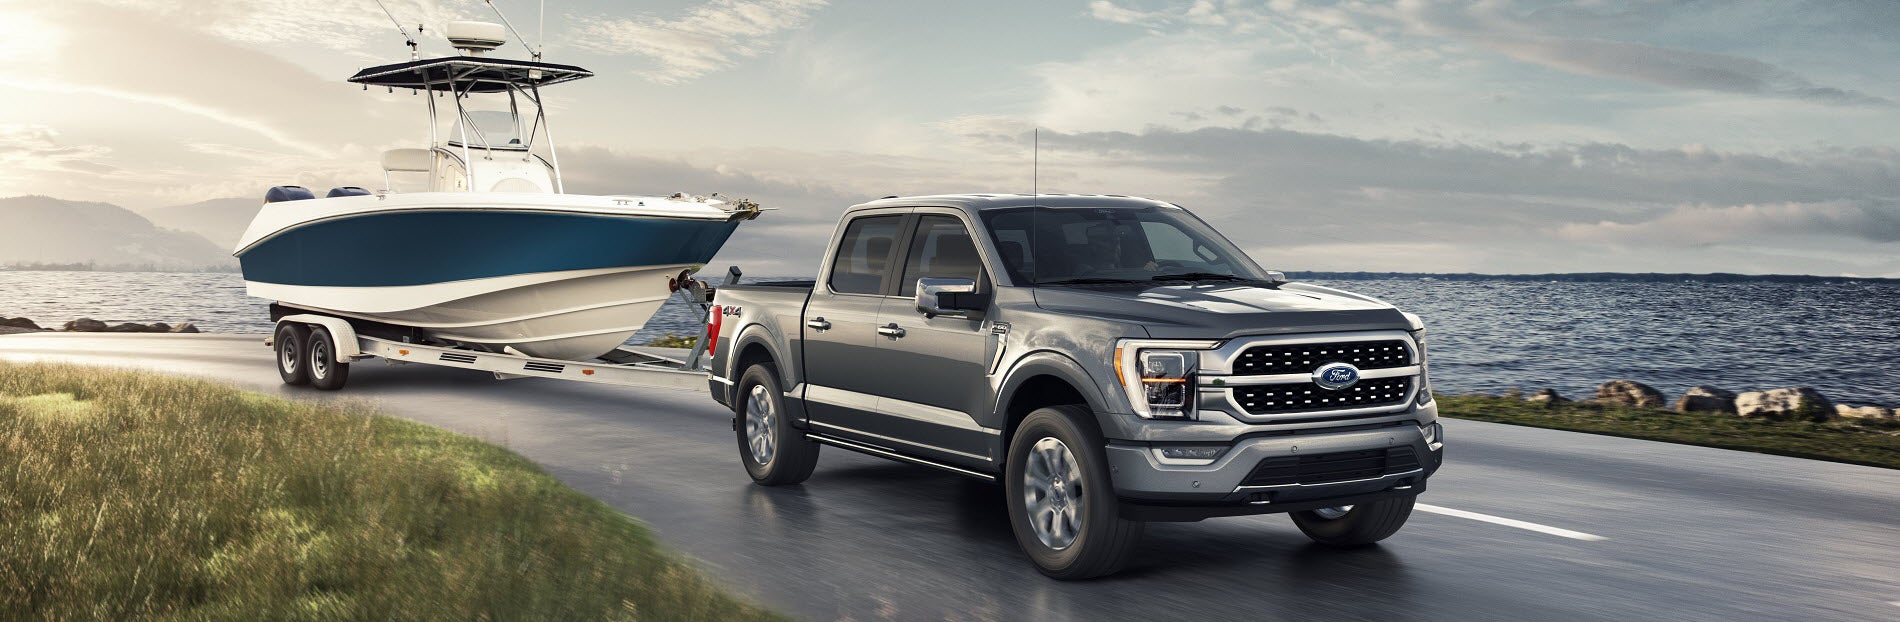 2021 Ford F-150 Towing Capacity | Fremont Motor Company Wyoming 2021 Ford F-150 3.5 Ecoboost Towing Capacity